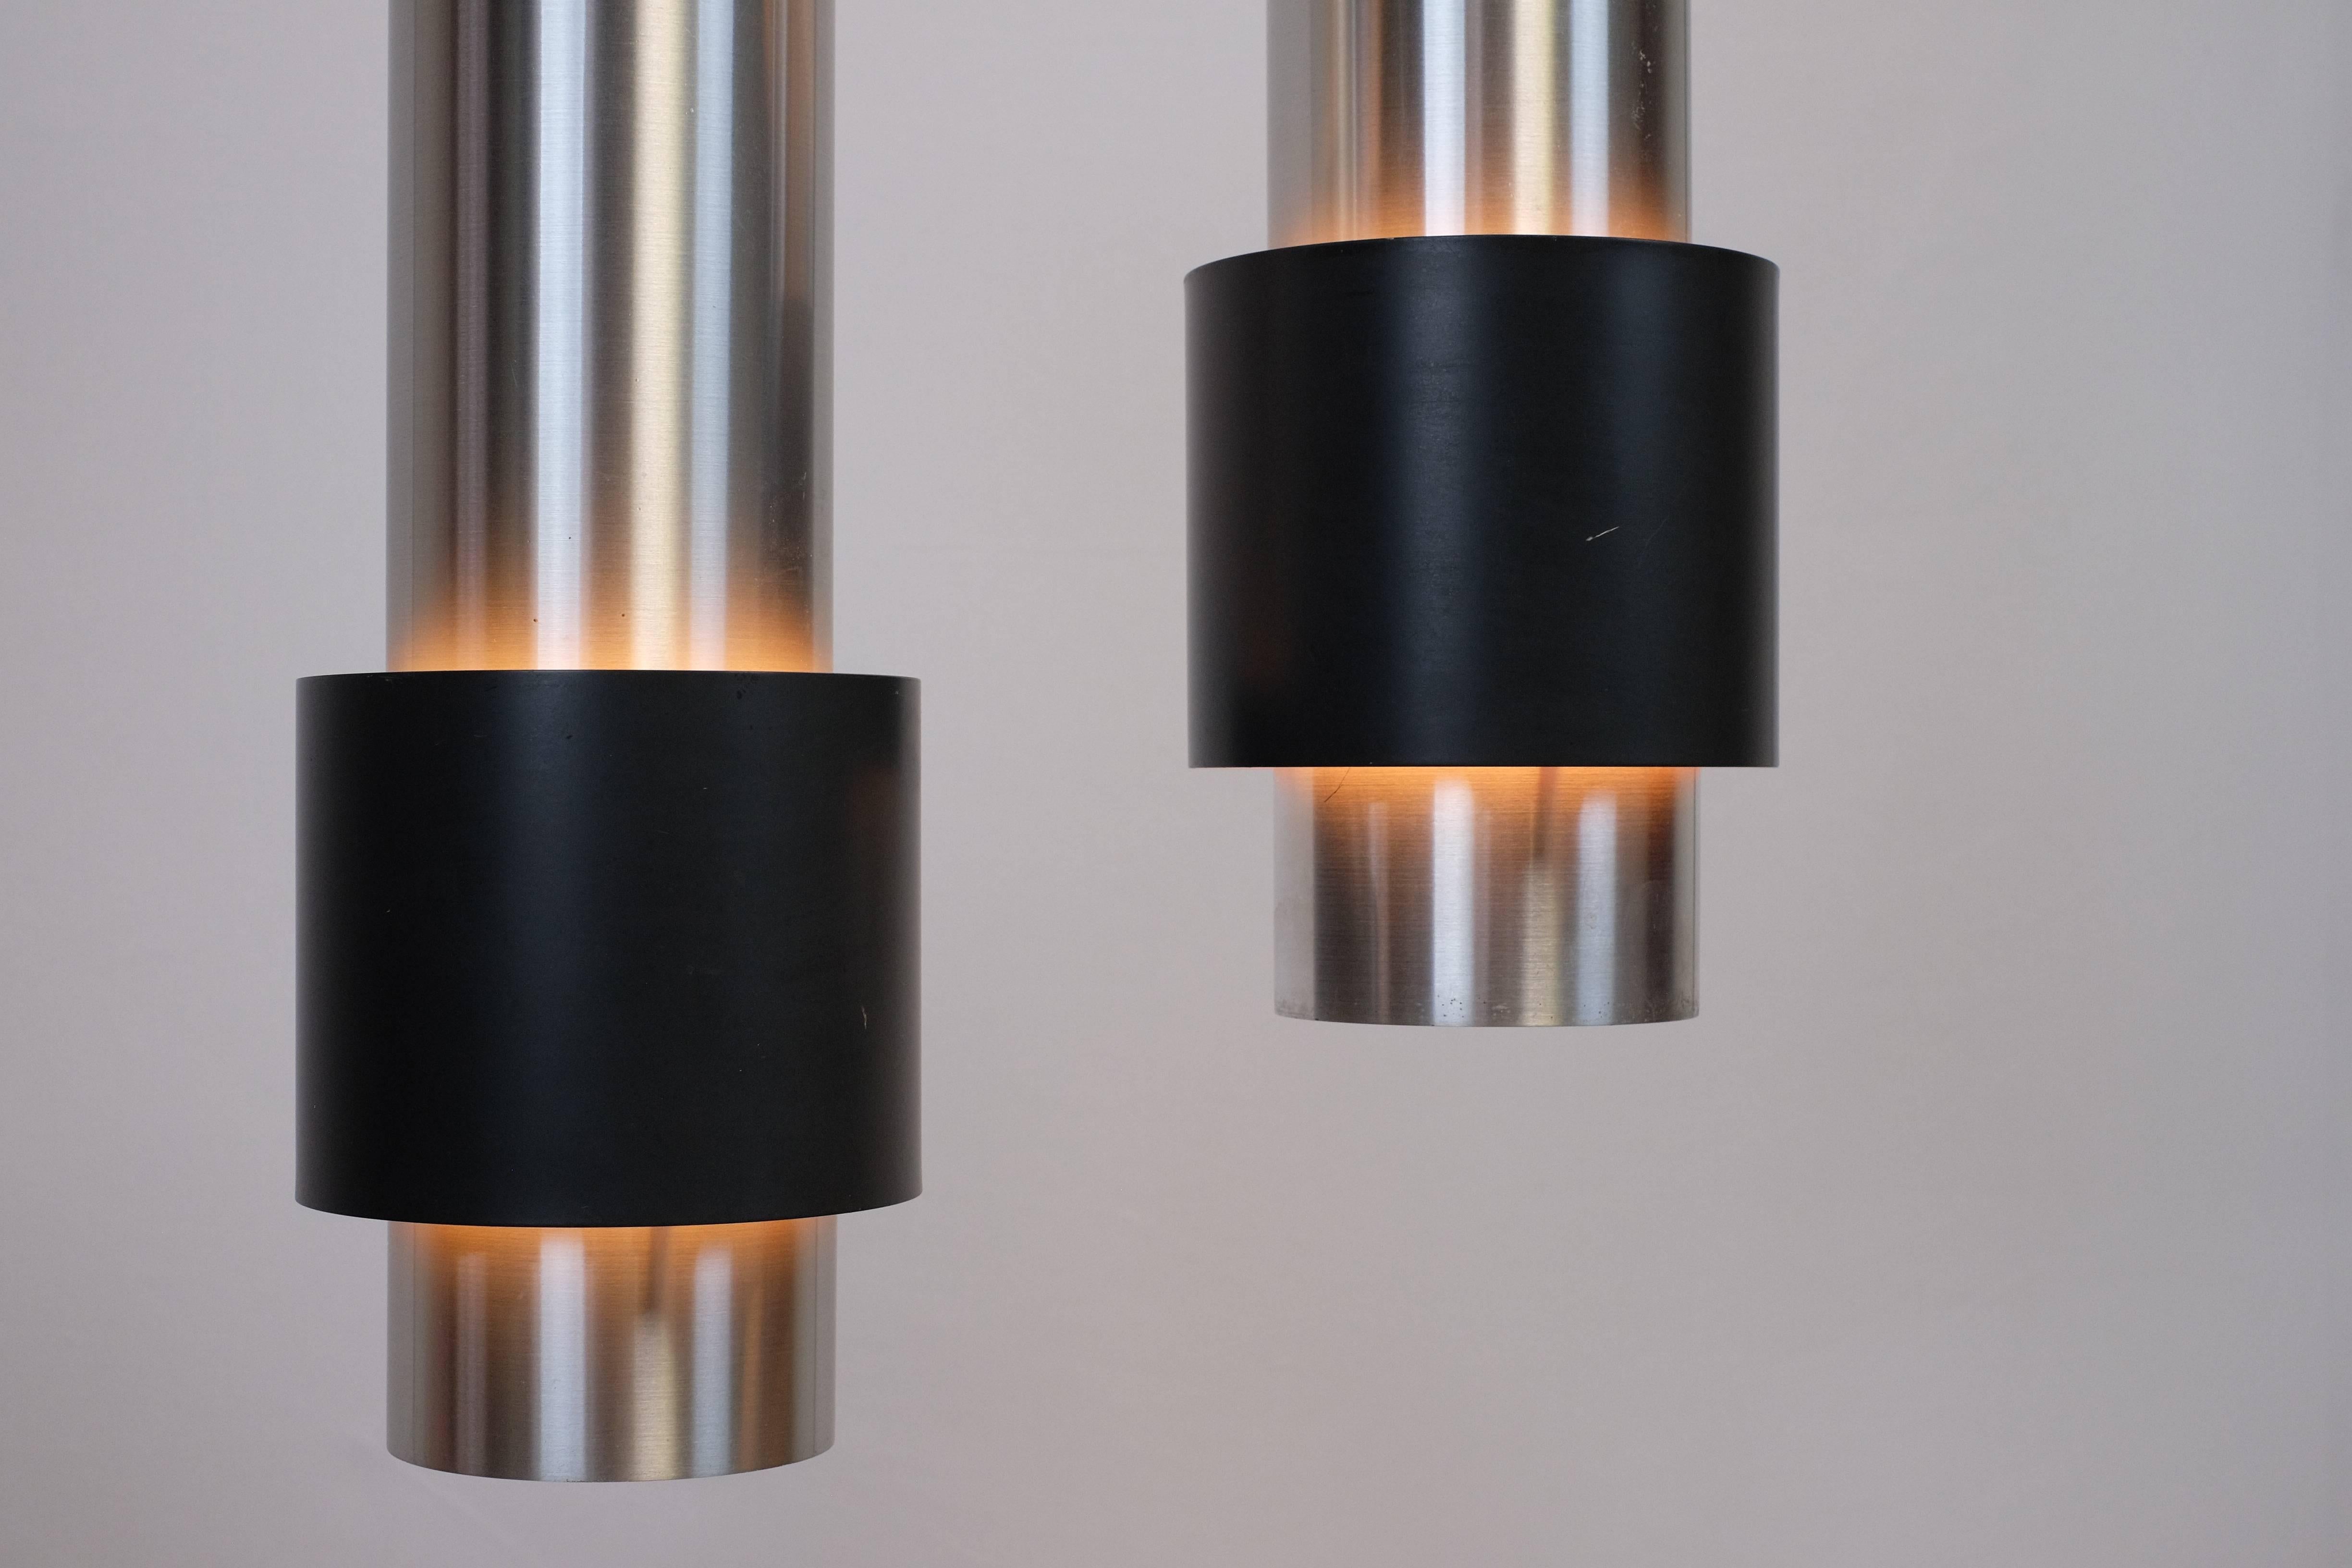 Lacquered Pair of Zenith Lamps Designed by Jo Hammerborg, Produced by Fog & Mørup in 1967